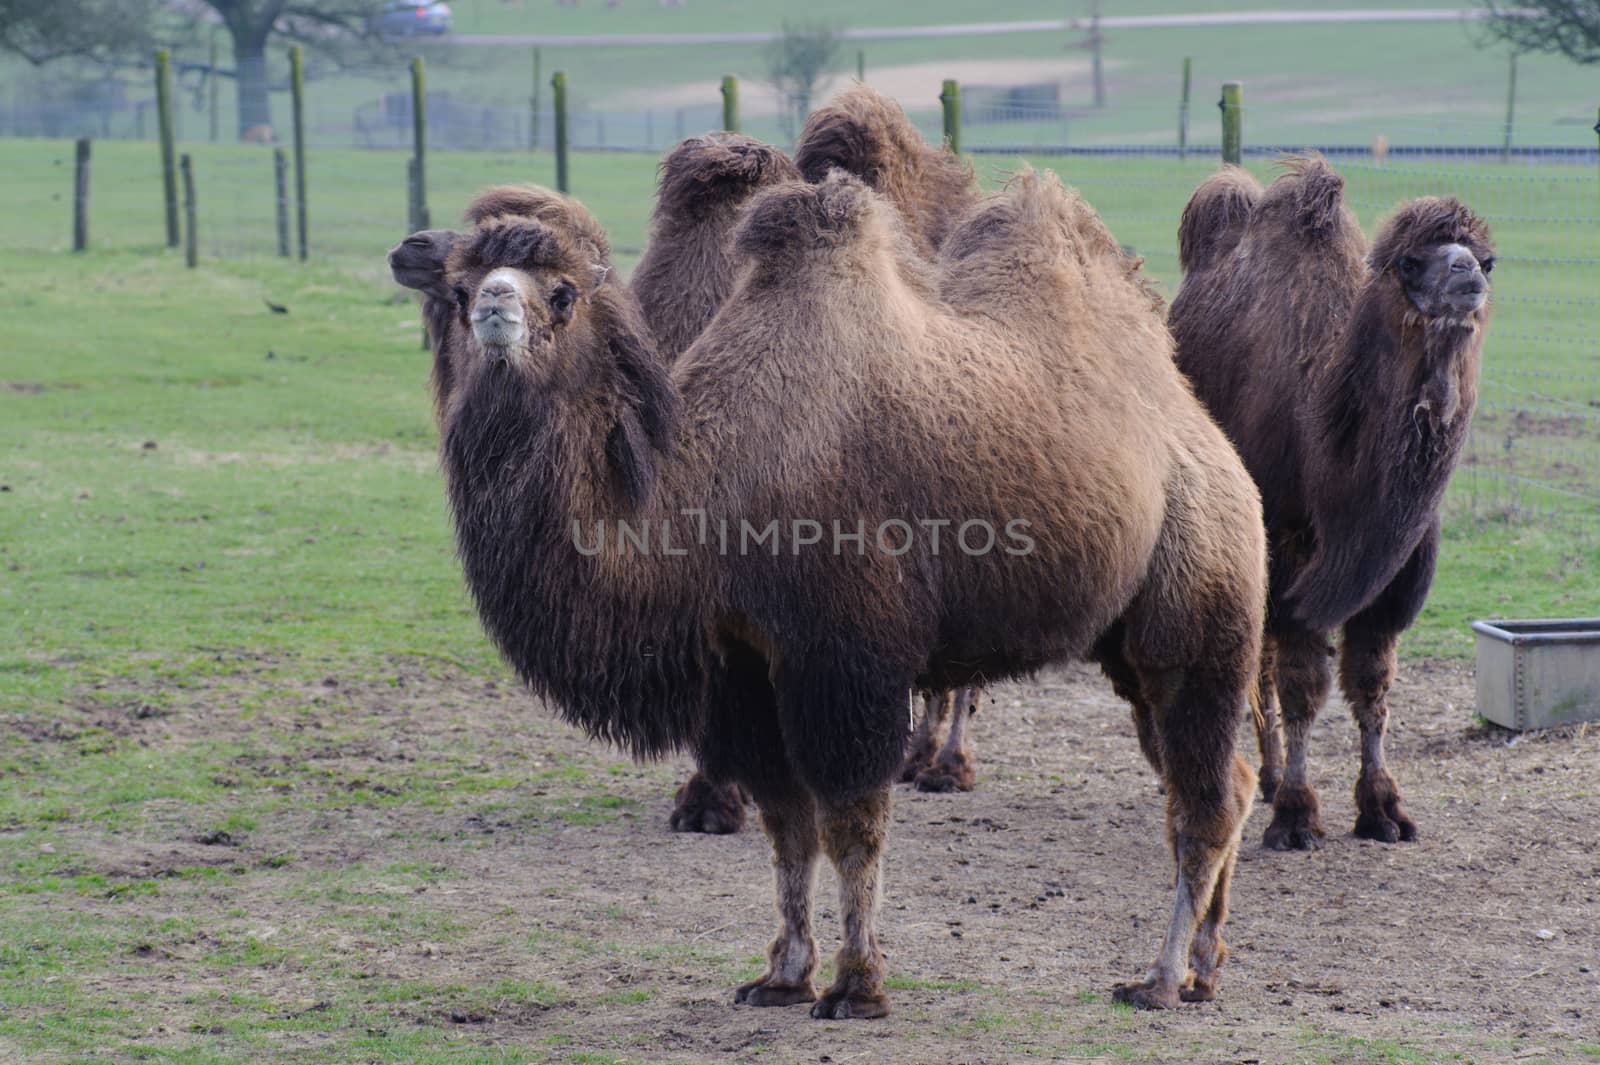 Three camels standing and looking